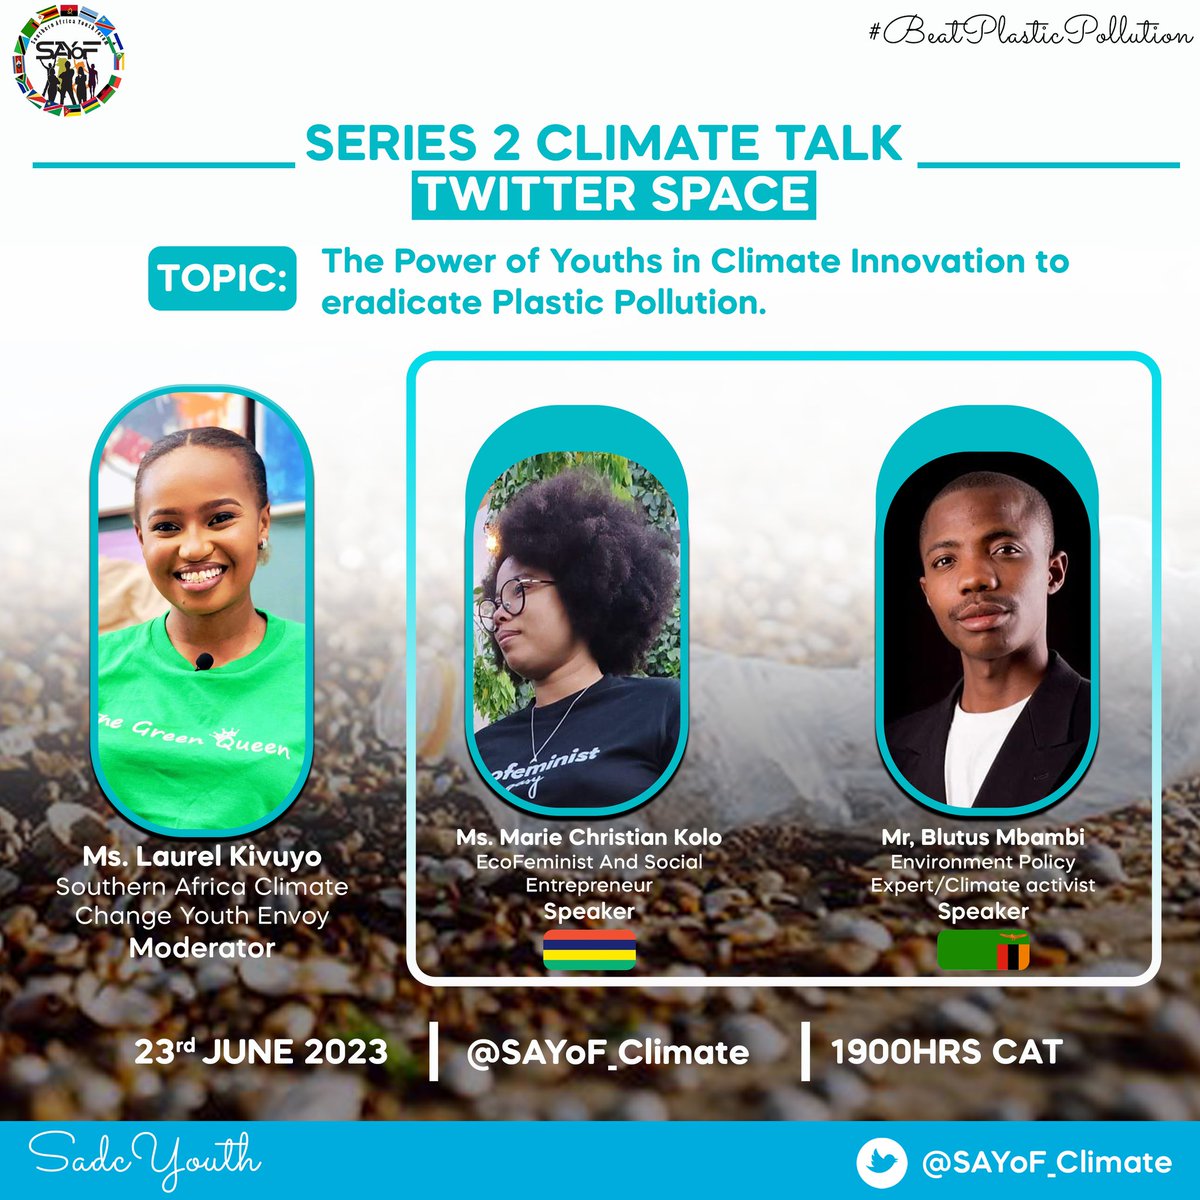 🌍 Join the conversation that's out of this world! 🚀

Get ready for SERIES 2 CLIMATE TALKS with expert speakers Mr. Blutus Mbambi and Ms. Marie Christian Kolo.🎙️✨

Don't miss this Friday's event on our upcoming Space, where we'll discuss innovative sustainable solutions